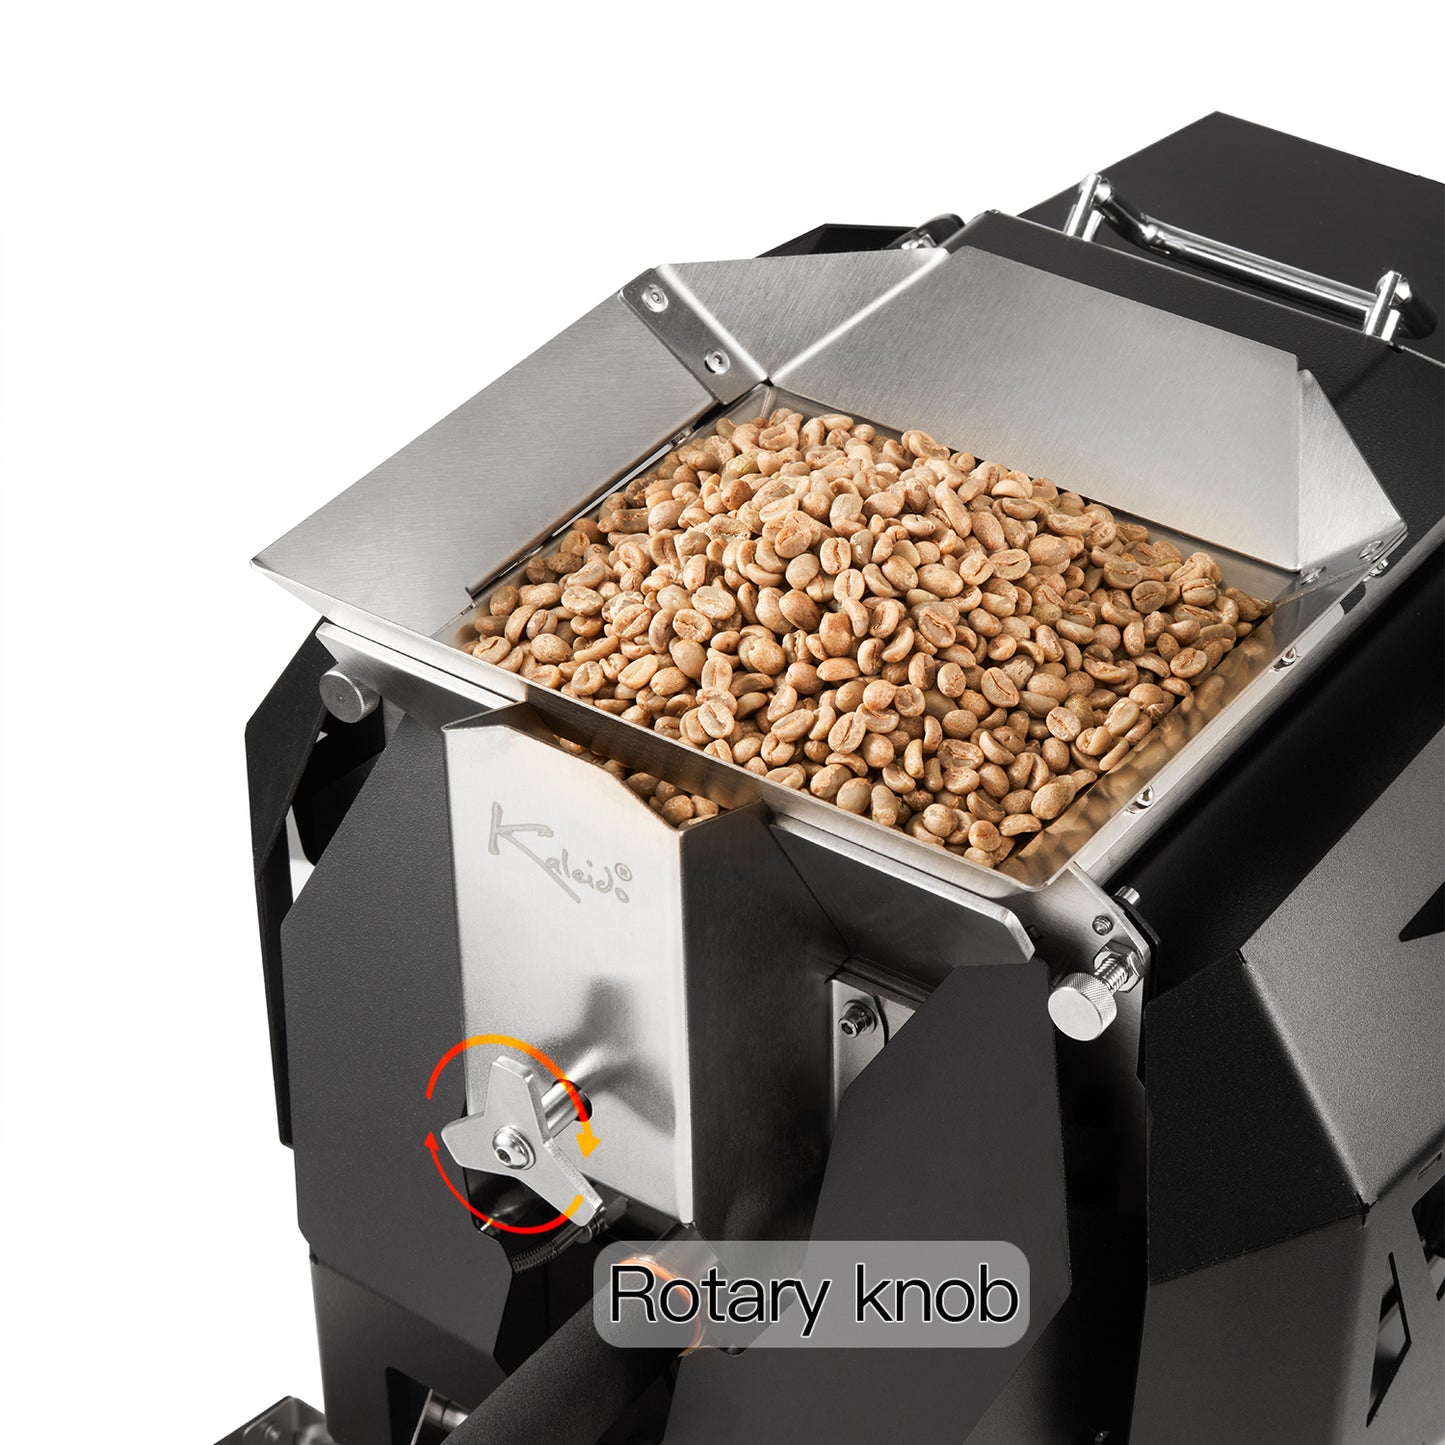 Kaleido Sniper M6S Smart Electric Heating Coffee Roaster（Kaleido system） - Dual Temperature Probe,Sealed Negative Pressure Bean Storage, Enhanced Steel Mesh Bean Drum, Direct Fire Heating, and Hot Air Circulation System(200-600g)